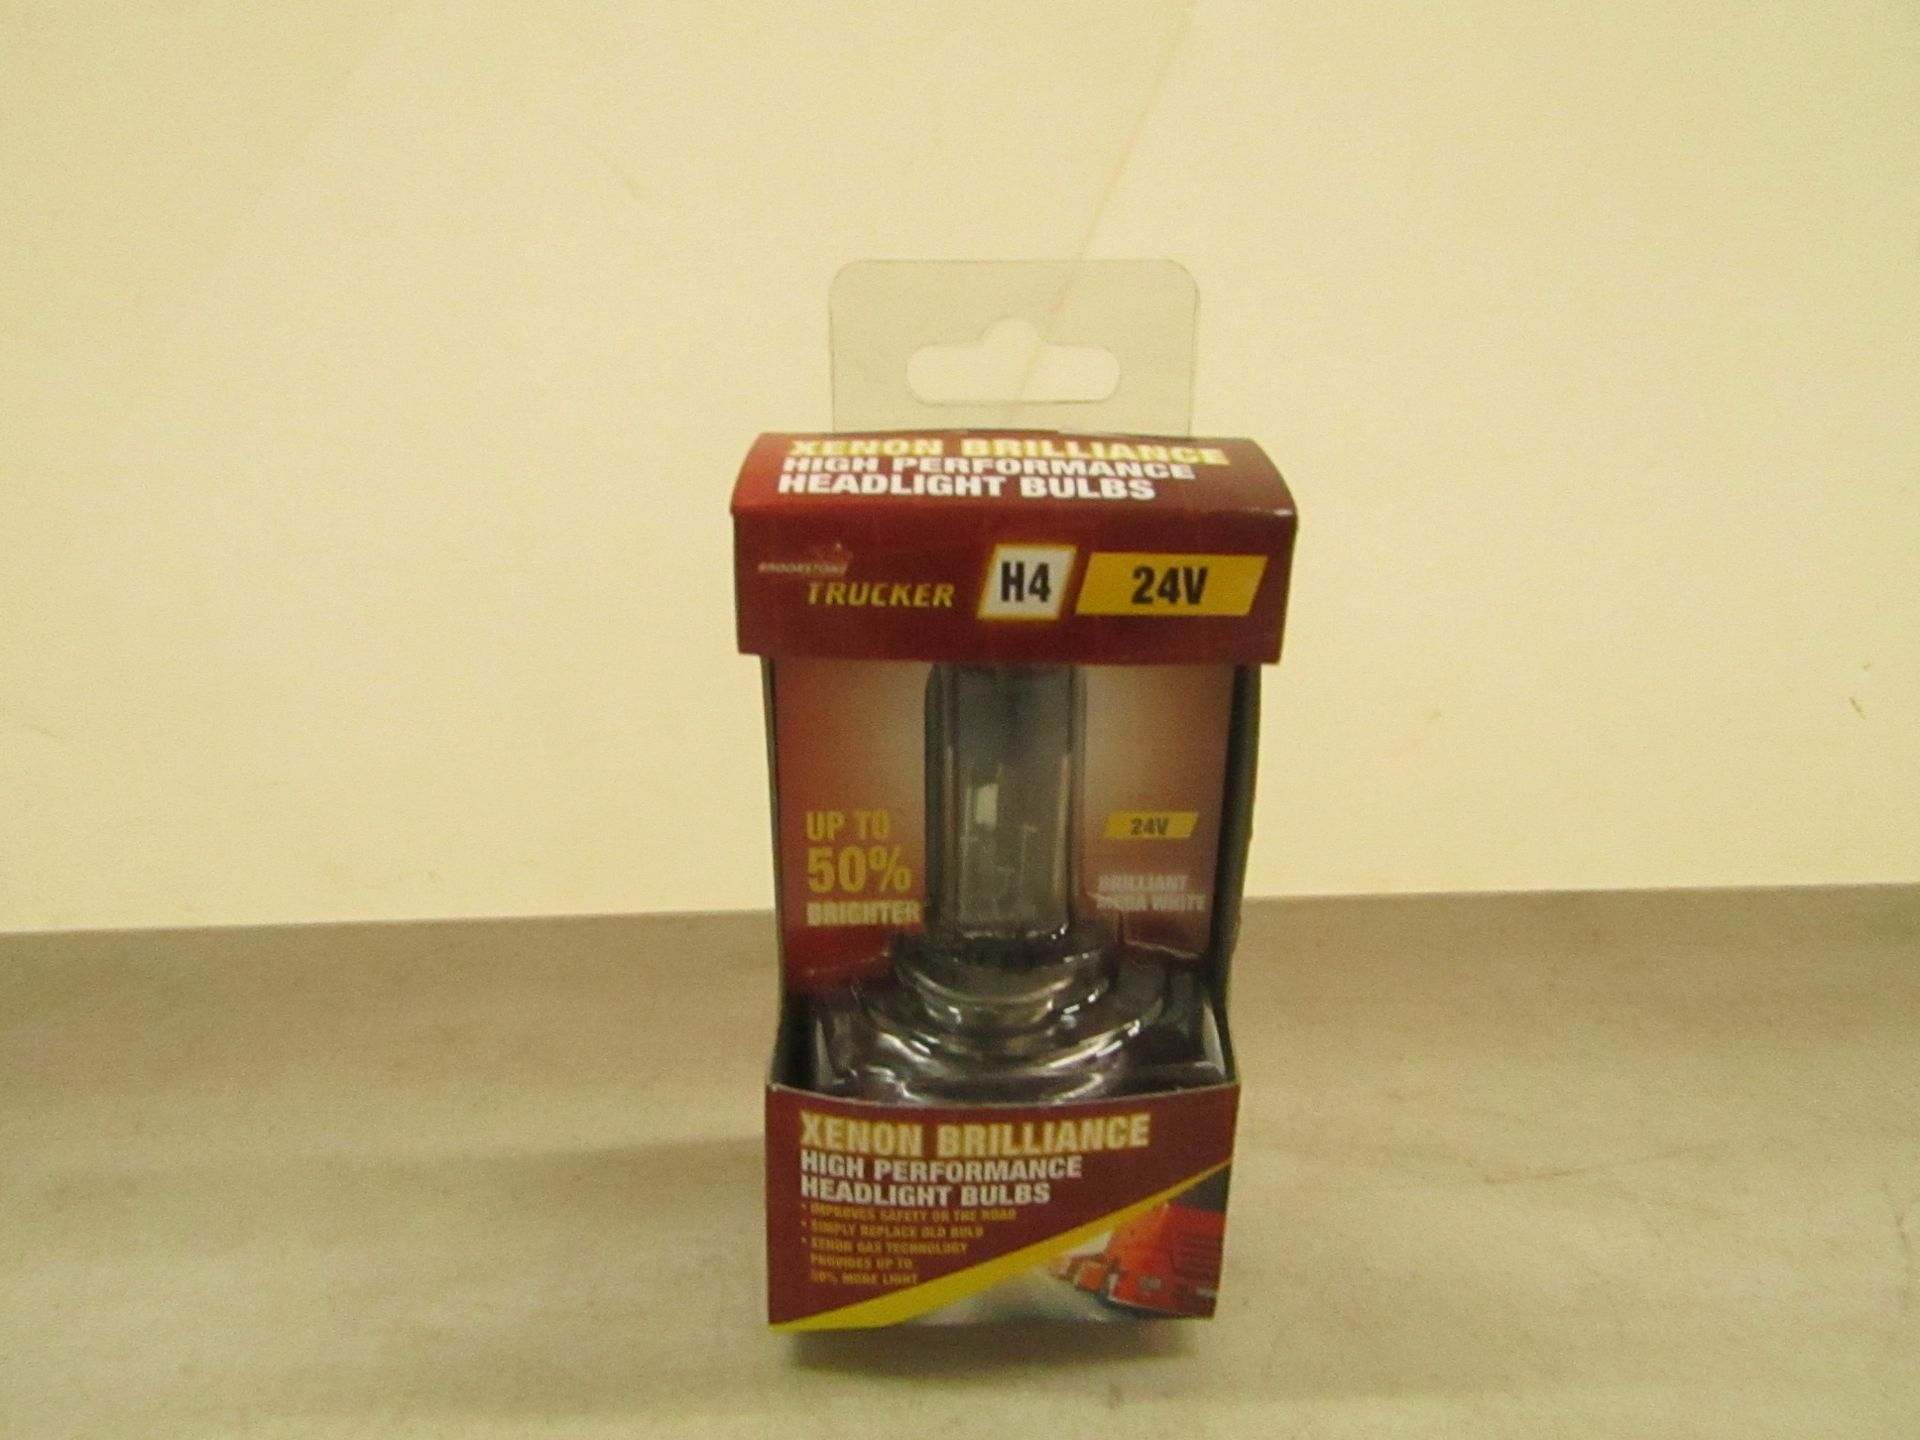 5x Brookstone 24v H4 Xenon headlight bulbs, new and packaged.